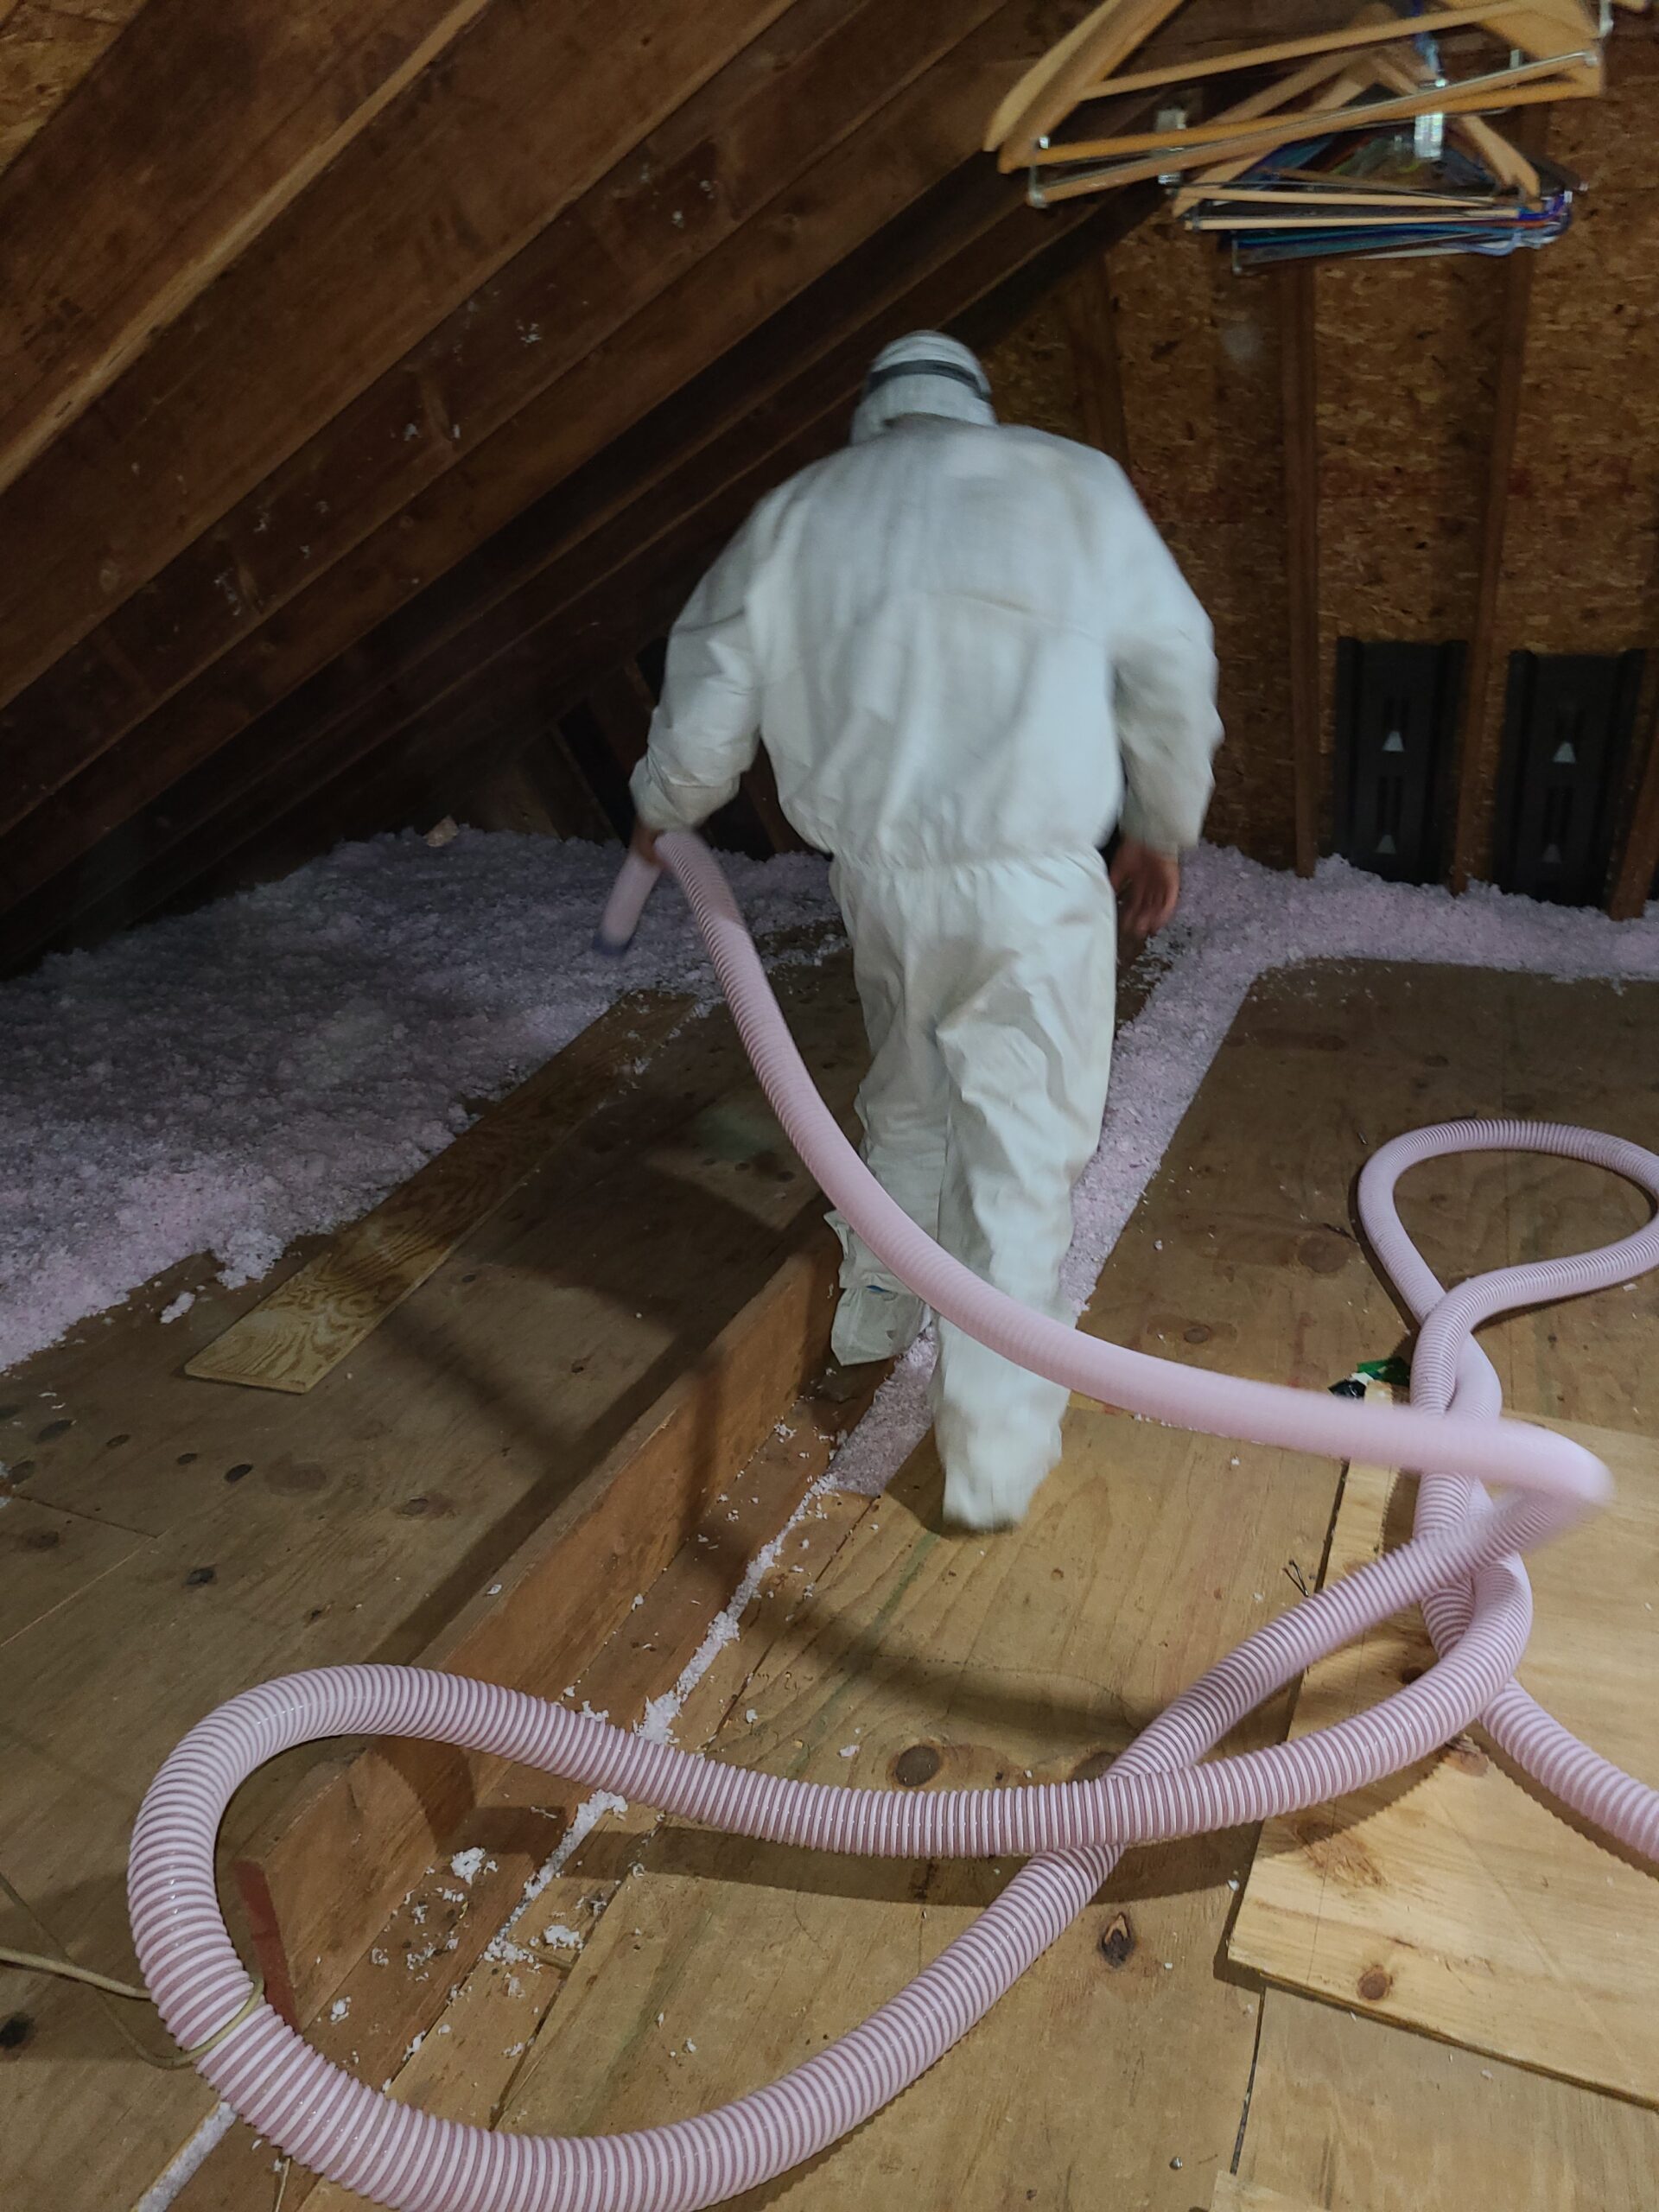 How Much Does Attic Cleaning Cost?